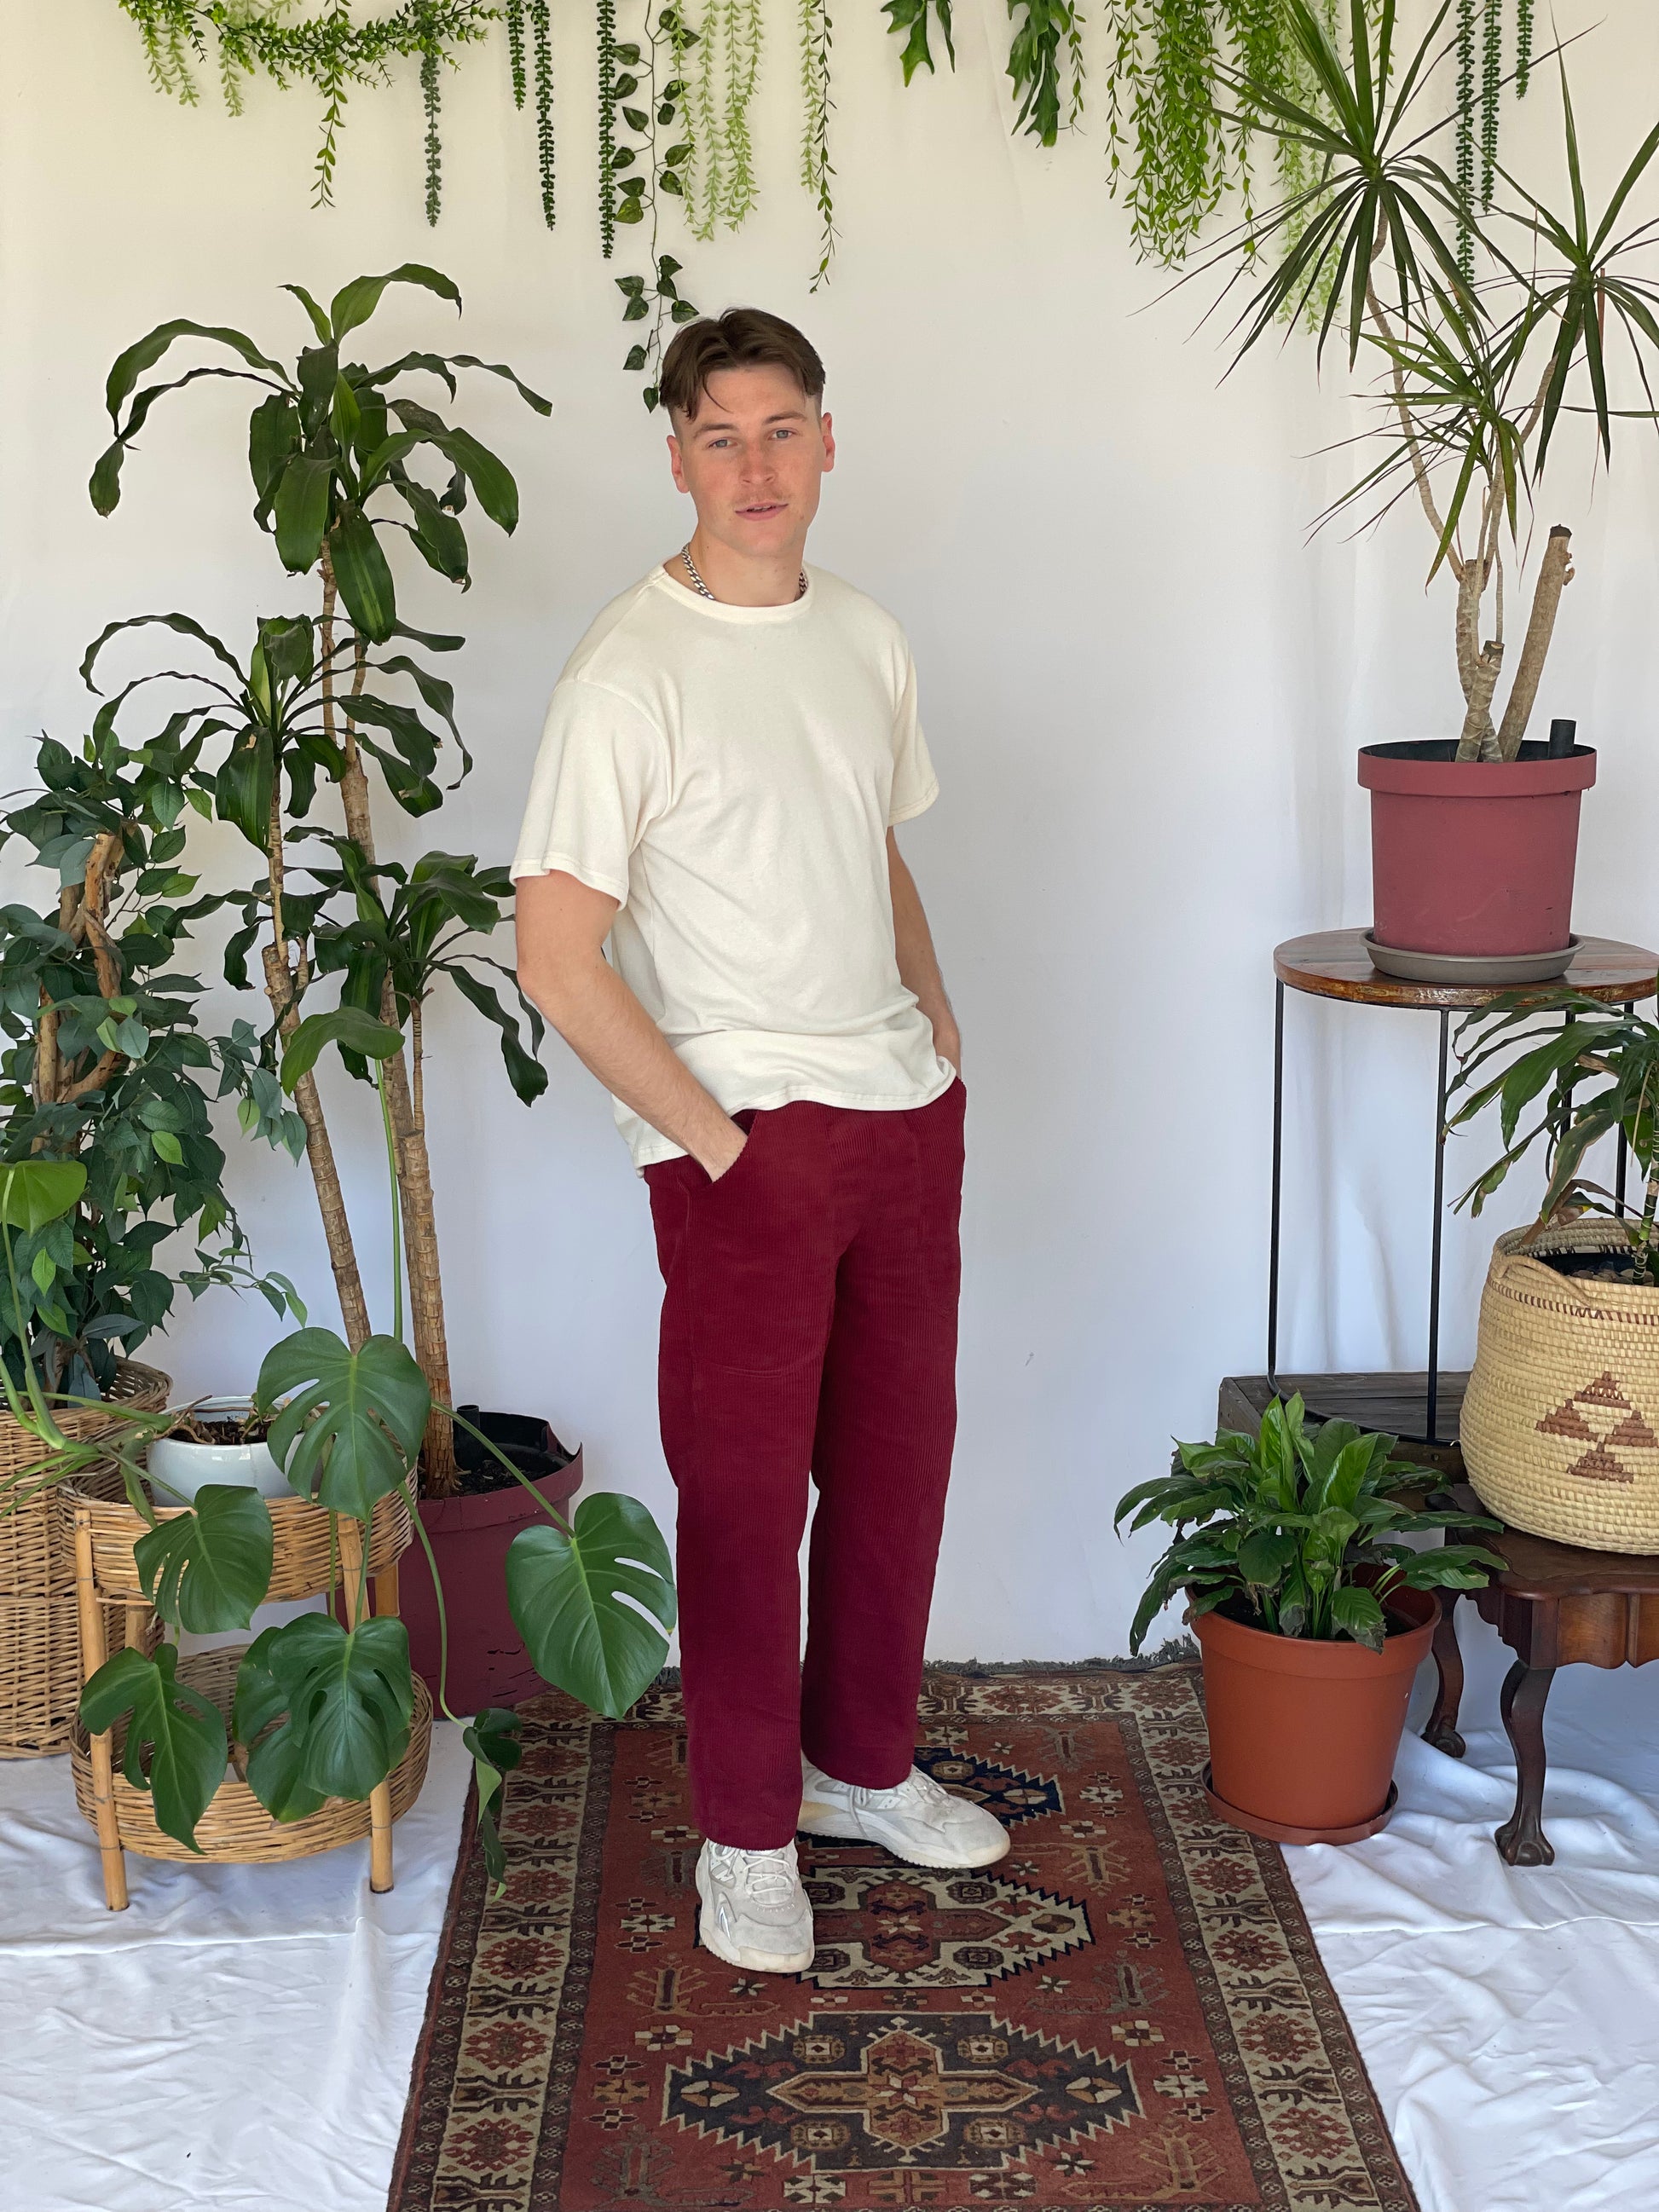 Model wears a cream t-shirt with burgundy corduroy pants and sneakers with their hands in pockets. The model is standing on a narrow carpet against a white backdrop with plants and hanging foliage. 